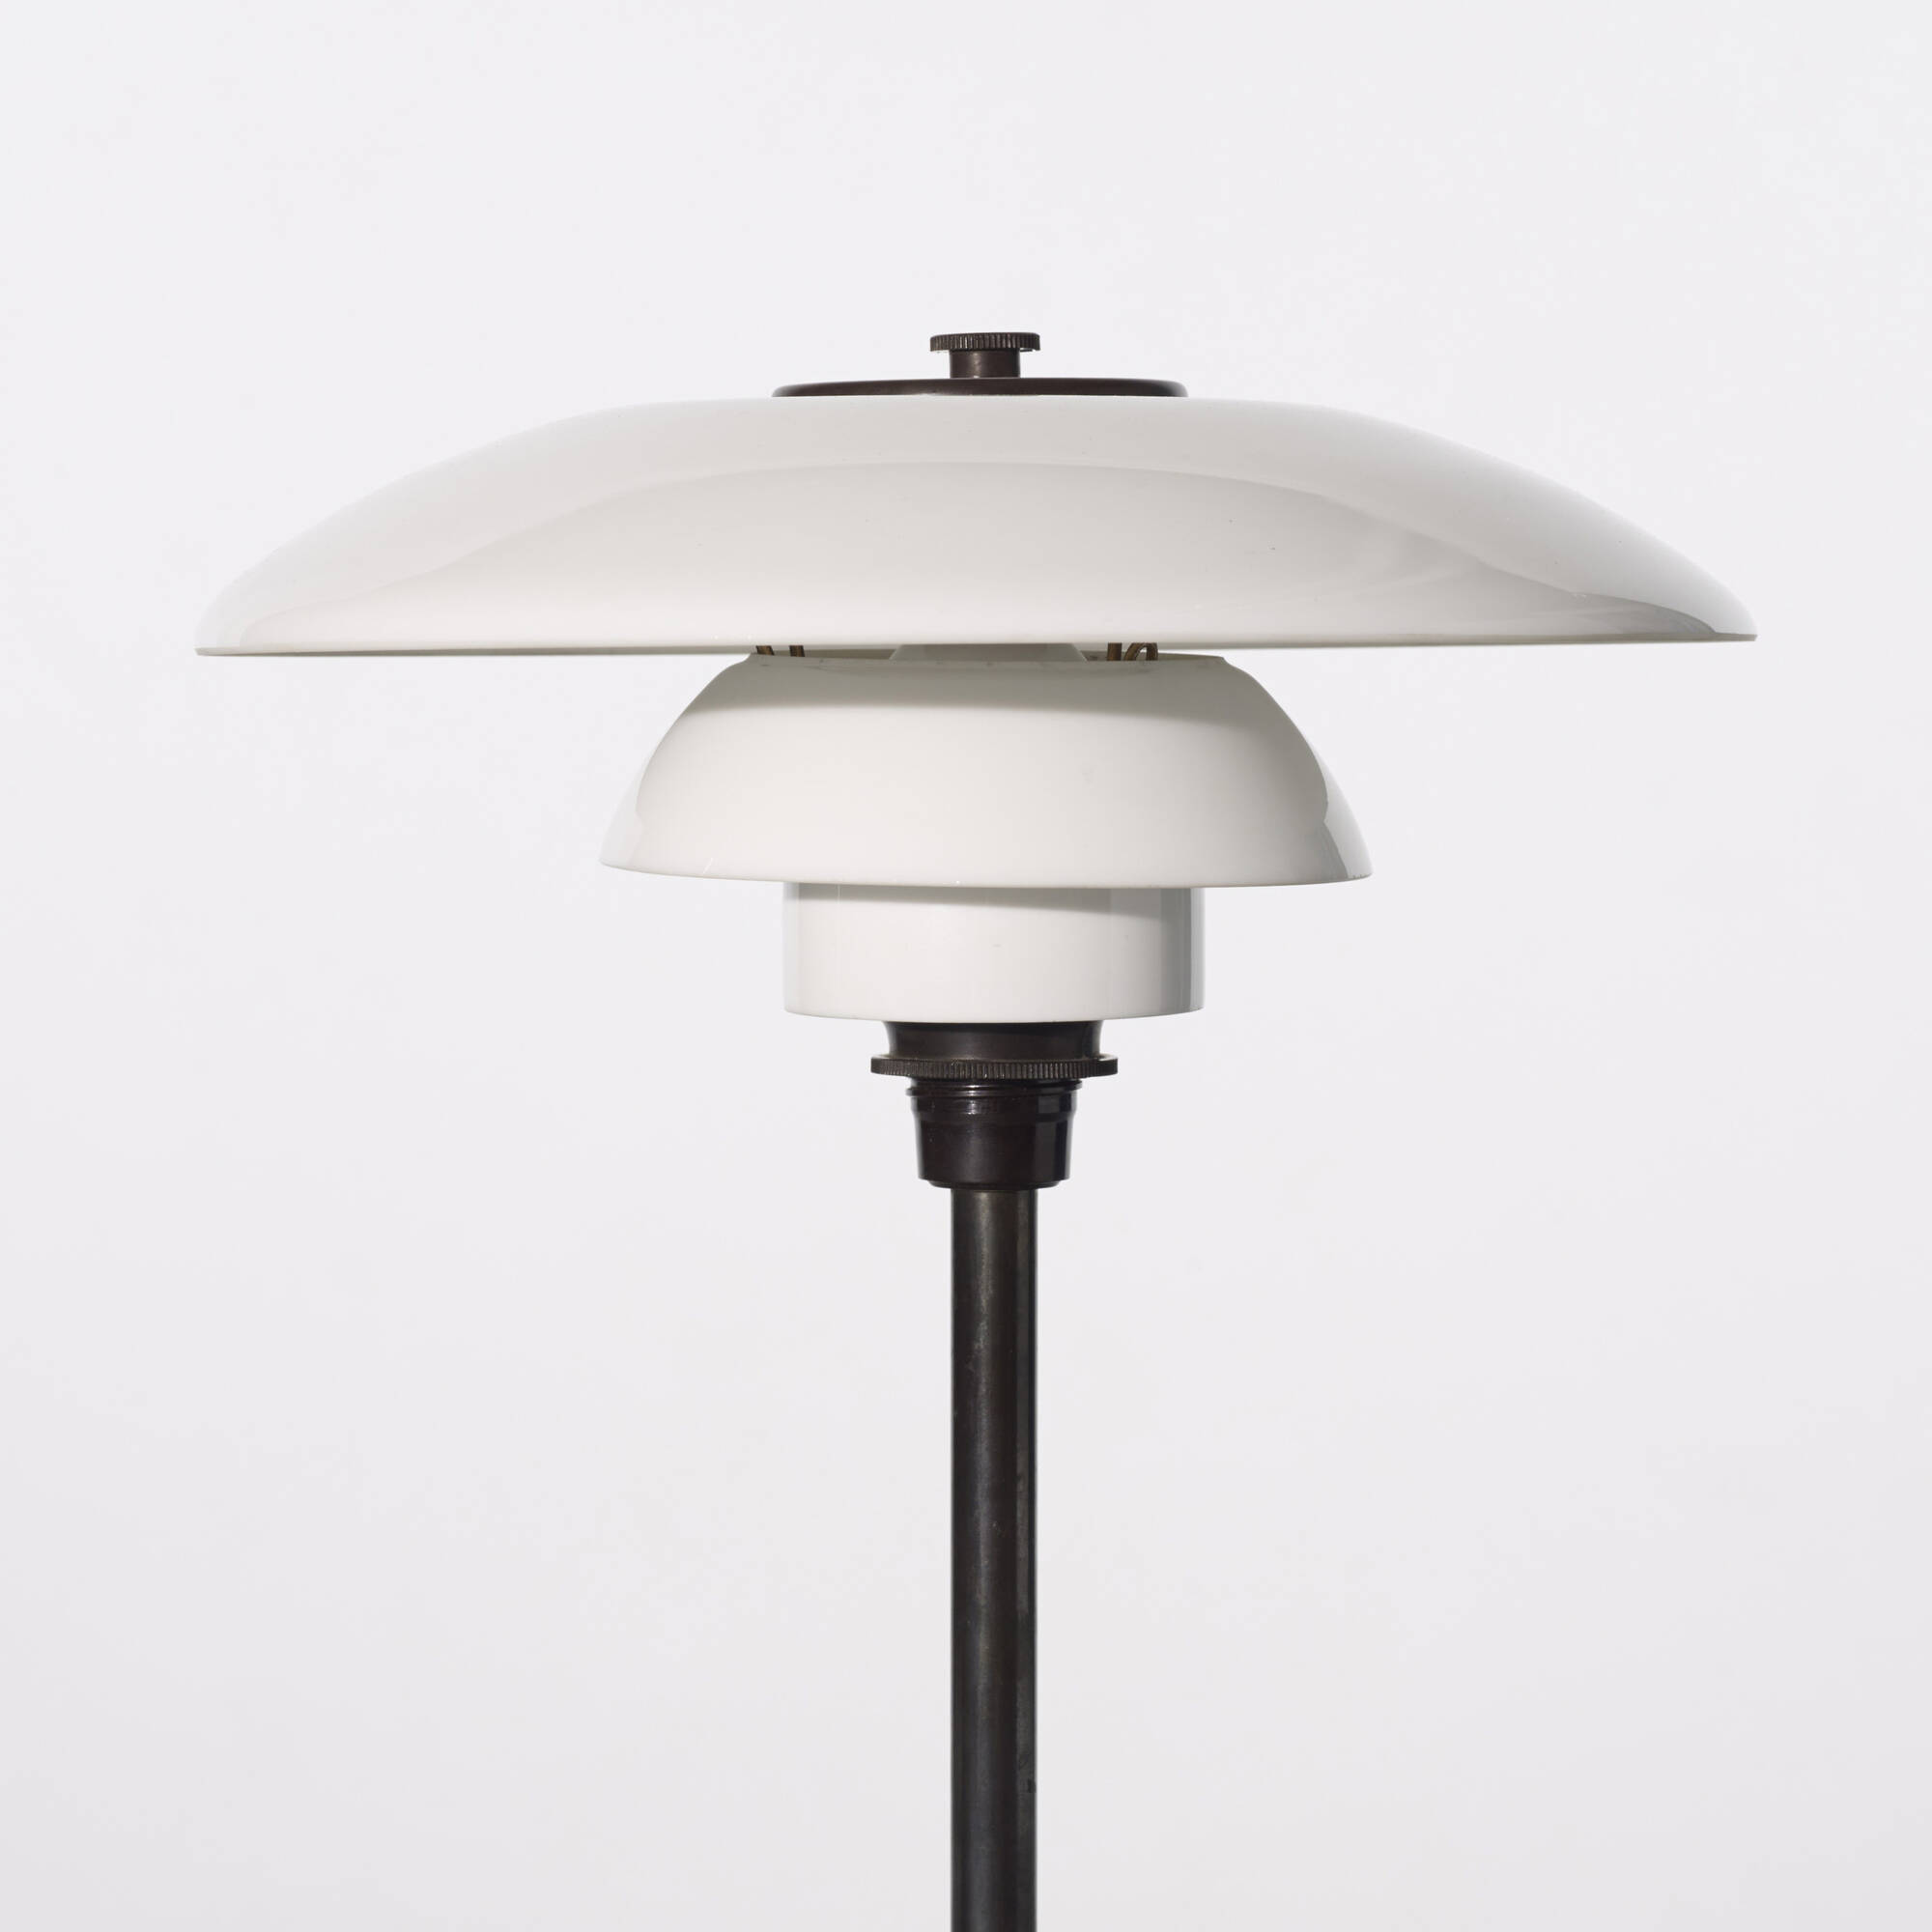 365 Poul Henningsen Ph 3 2 Table Lamp 8 May 14 Auctions Wright Auctions Of Art And Design